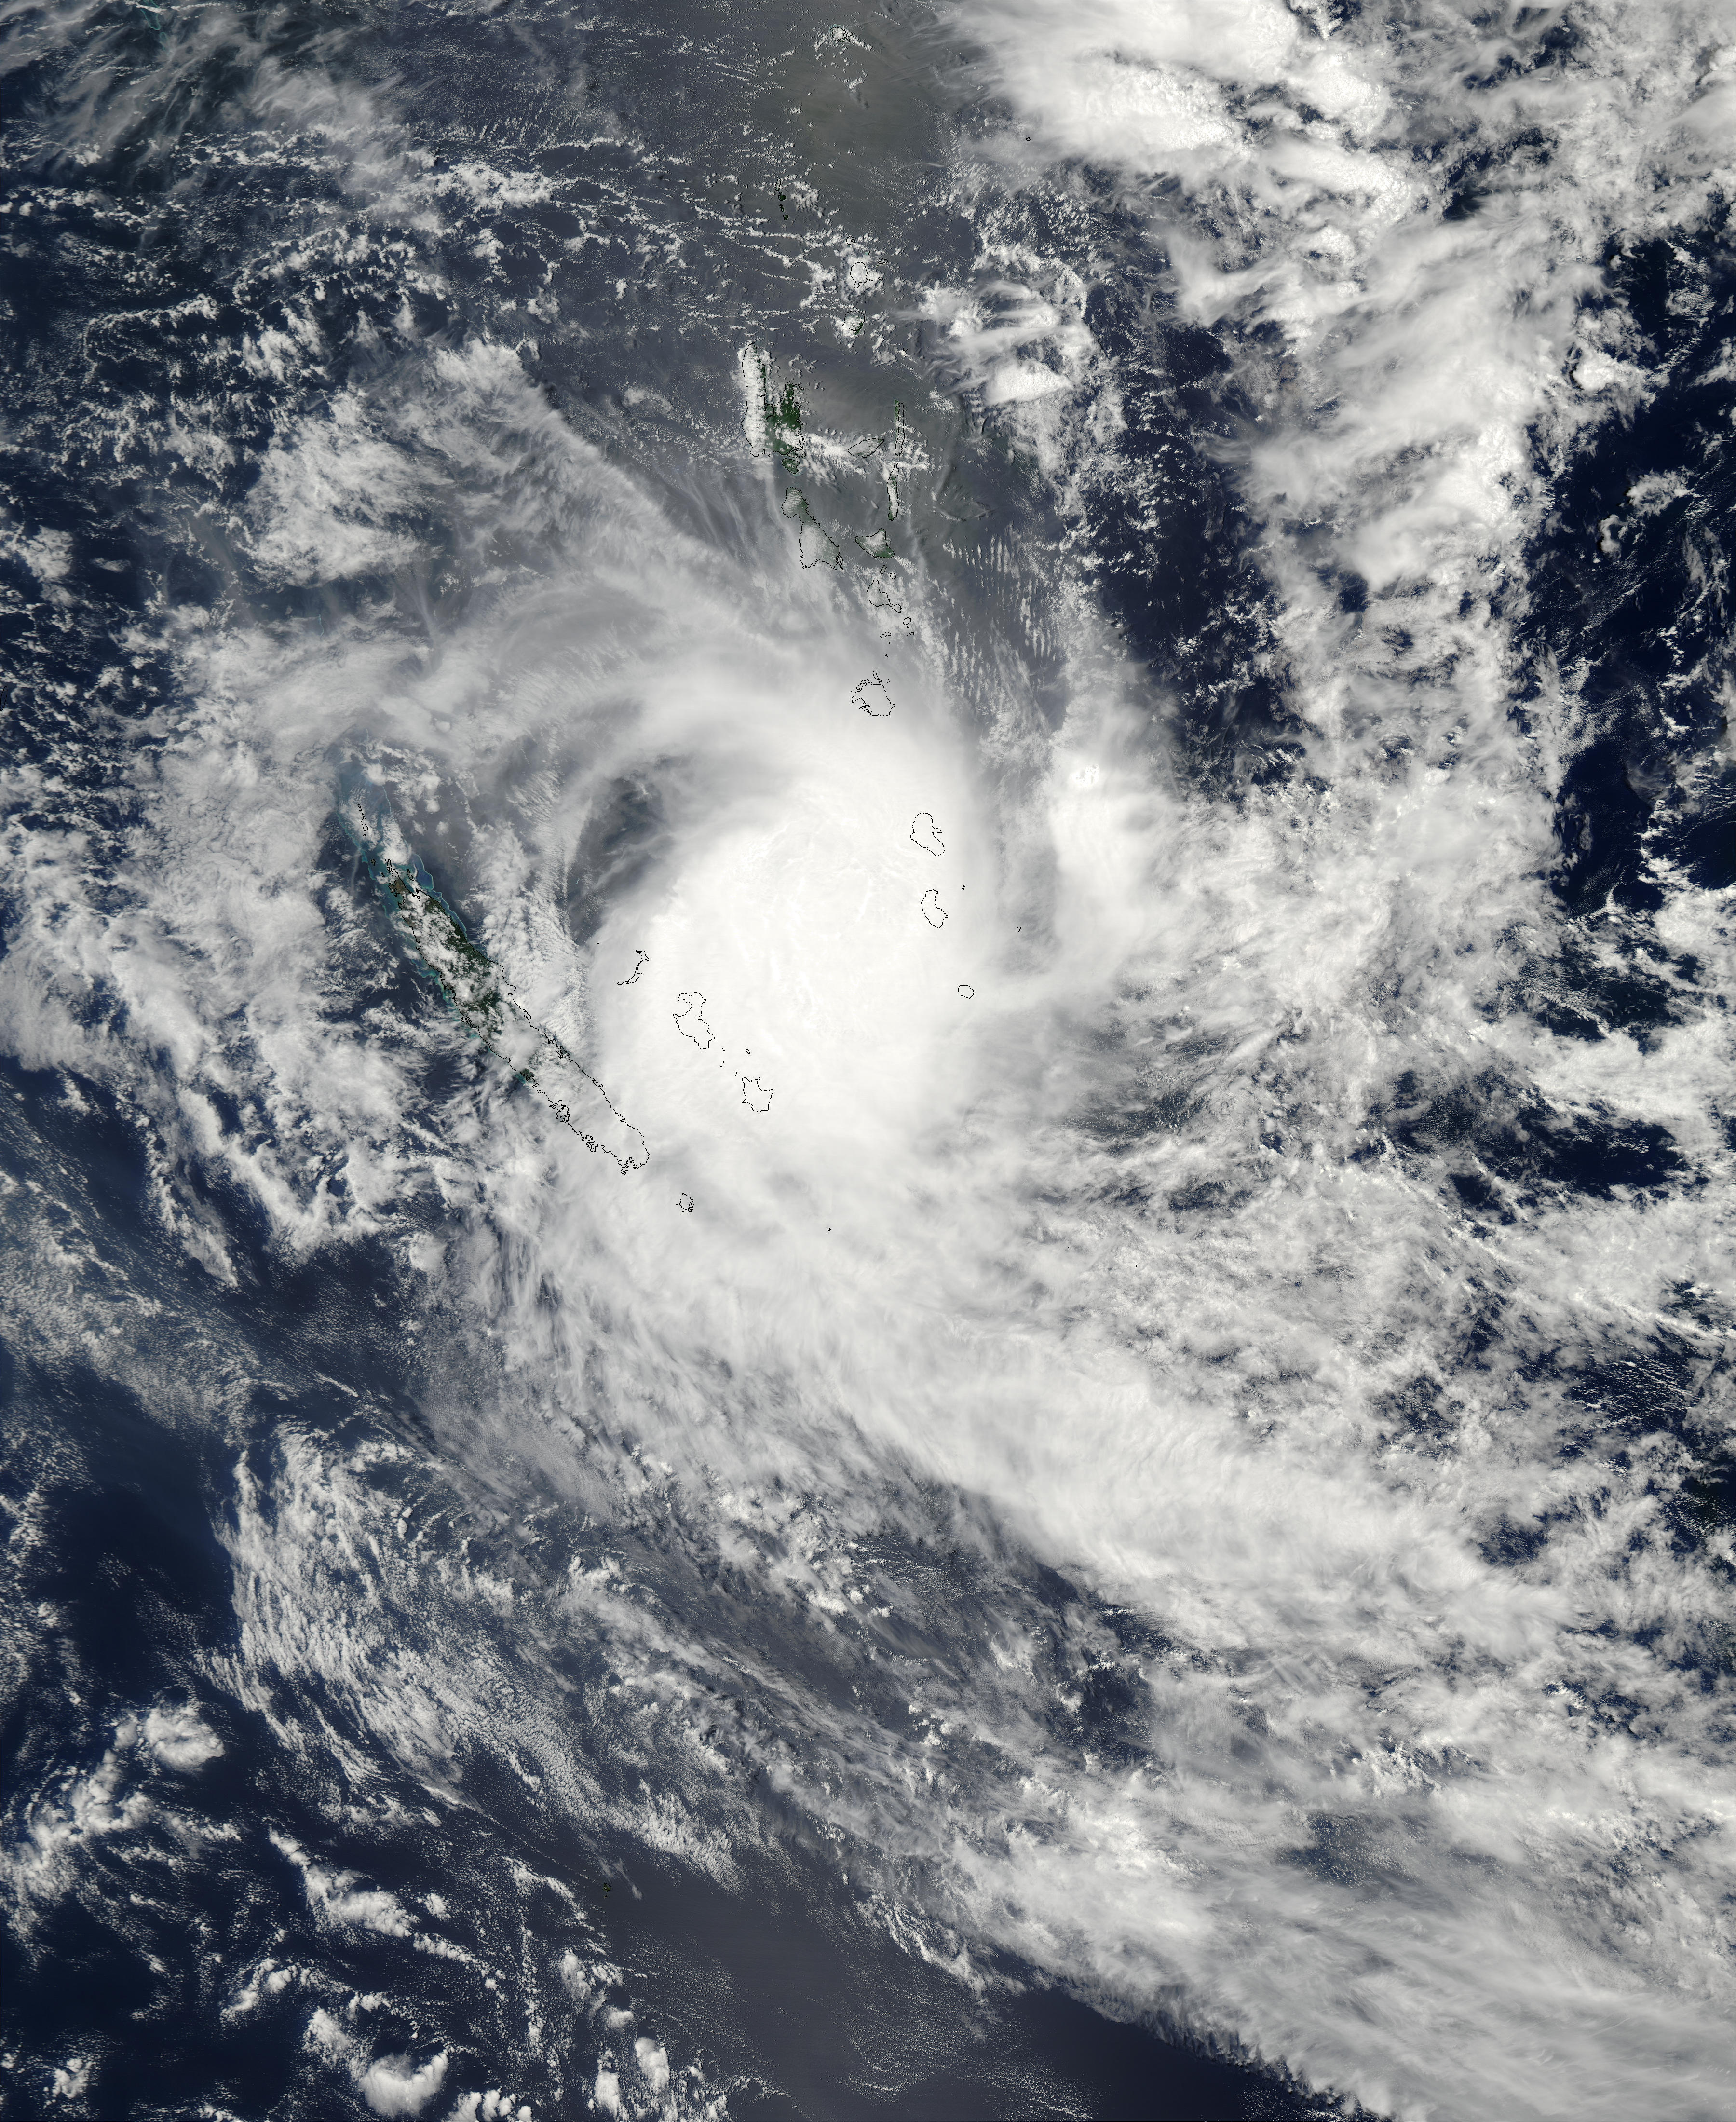 Tropical Cyclone Beni (12P), off New Caledonia, Pacific Ocean - related image preview